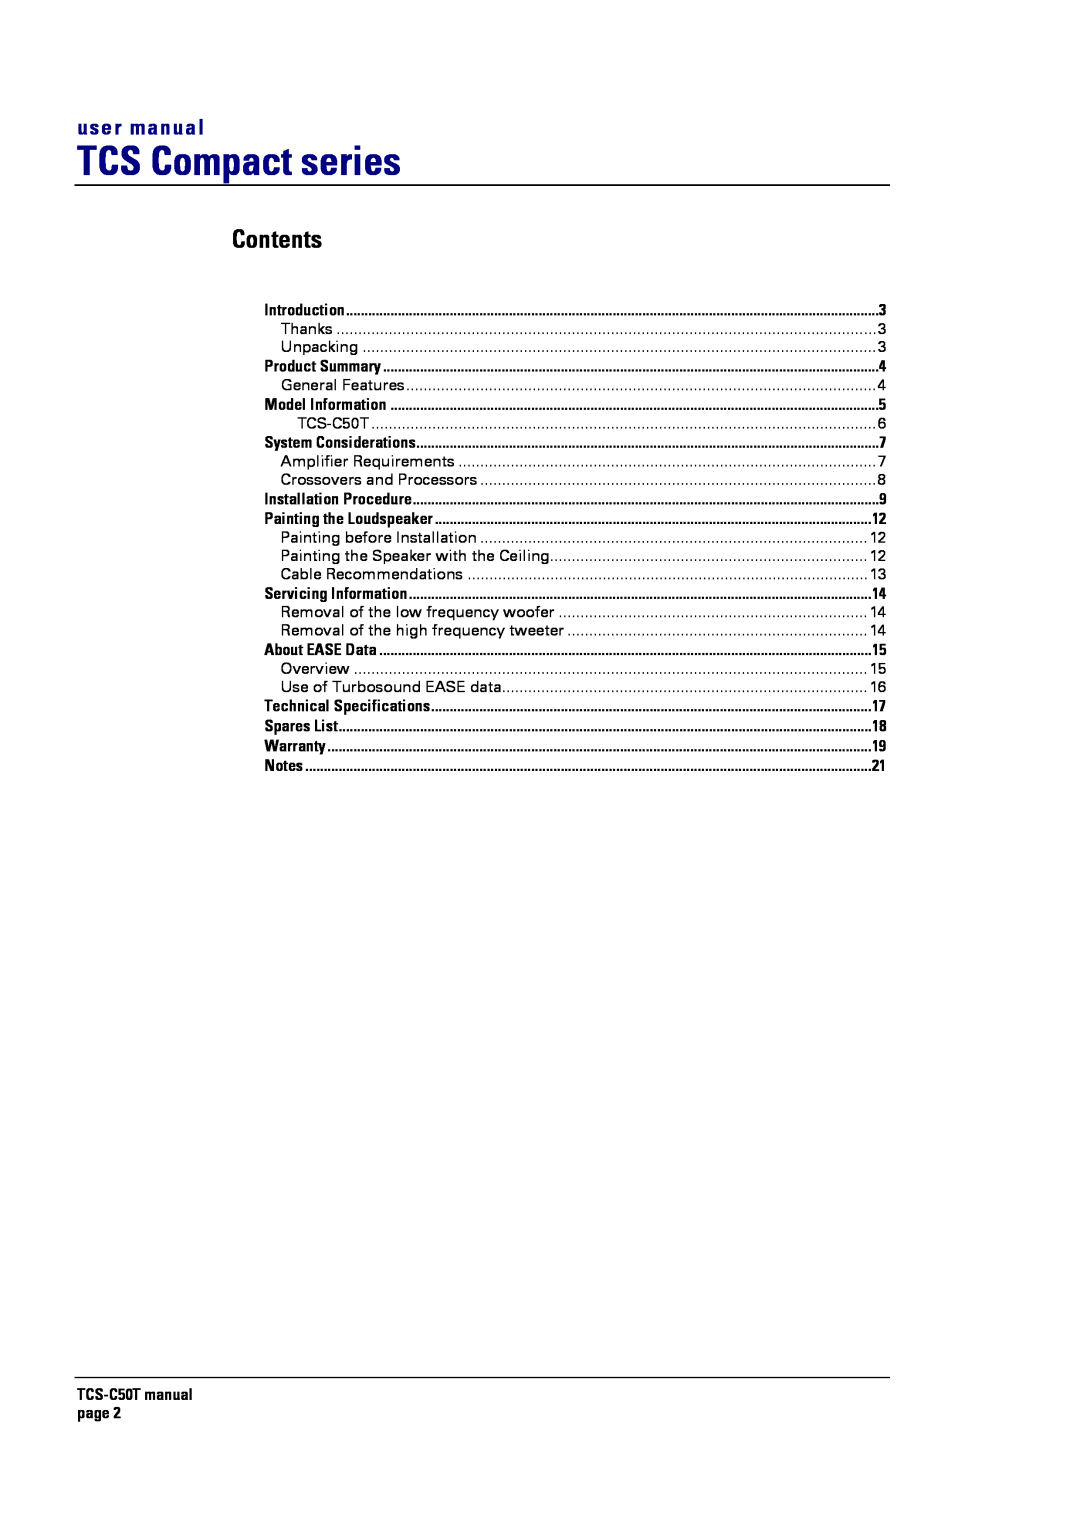 Turbosound user manual TCS Compact series, TCS-C50Tmanual page, Contents 